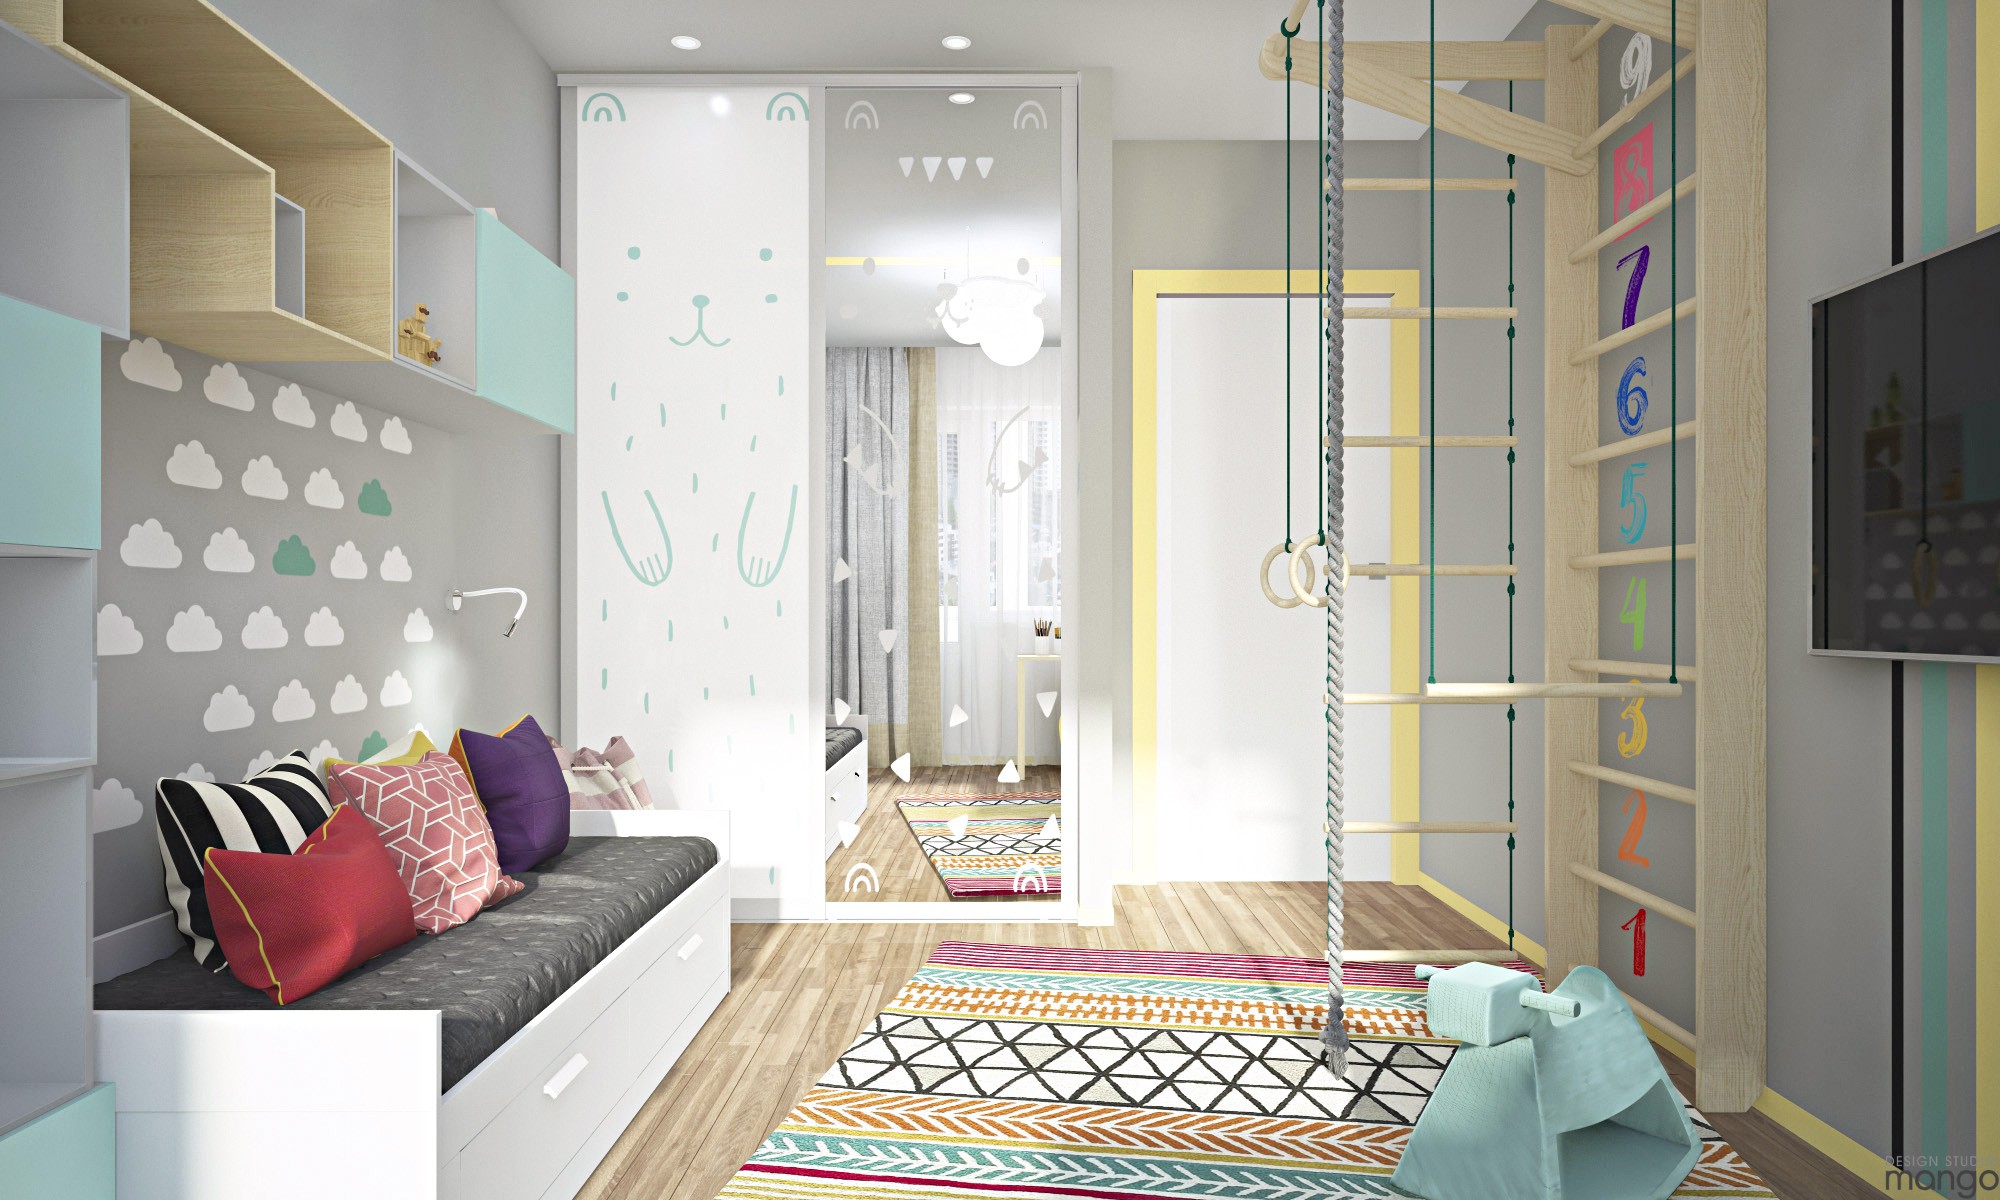 playful children's room design "width =" 2000 "height =" 1200 "srcset =" https://mileray.com/wp-content/uploads/2020/05/1588508734_796_Variety-of-Kids-Room-Decorating-Ideas-Which-Apply-With-a.jpg 2000w, https: // myfashionos .com / wp-content / uploads / 2016/11 / Design-Studio-Mango6-5-300x180.jpg 300w, https://mileray.com/wp-content/uploads/2016/11/Design-Studio- Mango6- 5-768x461.jpg 768w, https://mileray.com/wp-content/uploads/2016/11/Design-Studio-Mango6-5-1024x614.jpg 1024w, https://mileray.com/wp- content / uploads / 2016/11 / Design-Studio-Mango6-5-696x418.jpg 696w, https://mileray.com/wp-content/uploads/2016/11/Design-Studio-Mango6-5-1068x641.jpg 1068w, https://mileray.com/wp-content/uploads/2016/11/Design-Studio-Mango6-5-700x420.jpg 700w "sizes =" (maximum width: 2000px) 100vw, 2000px